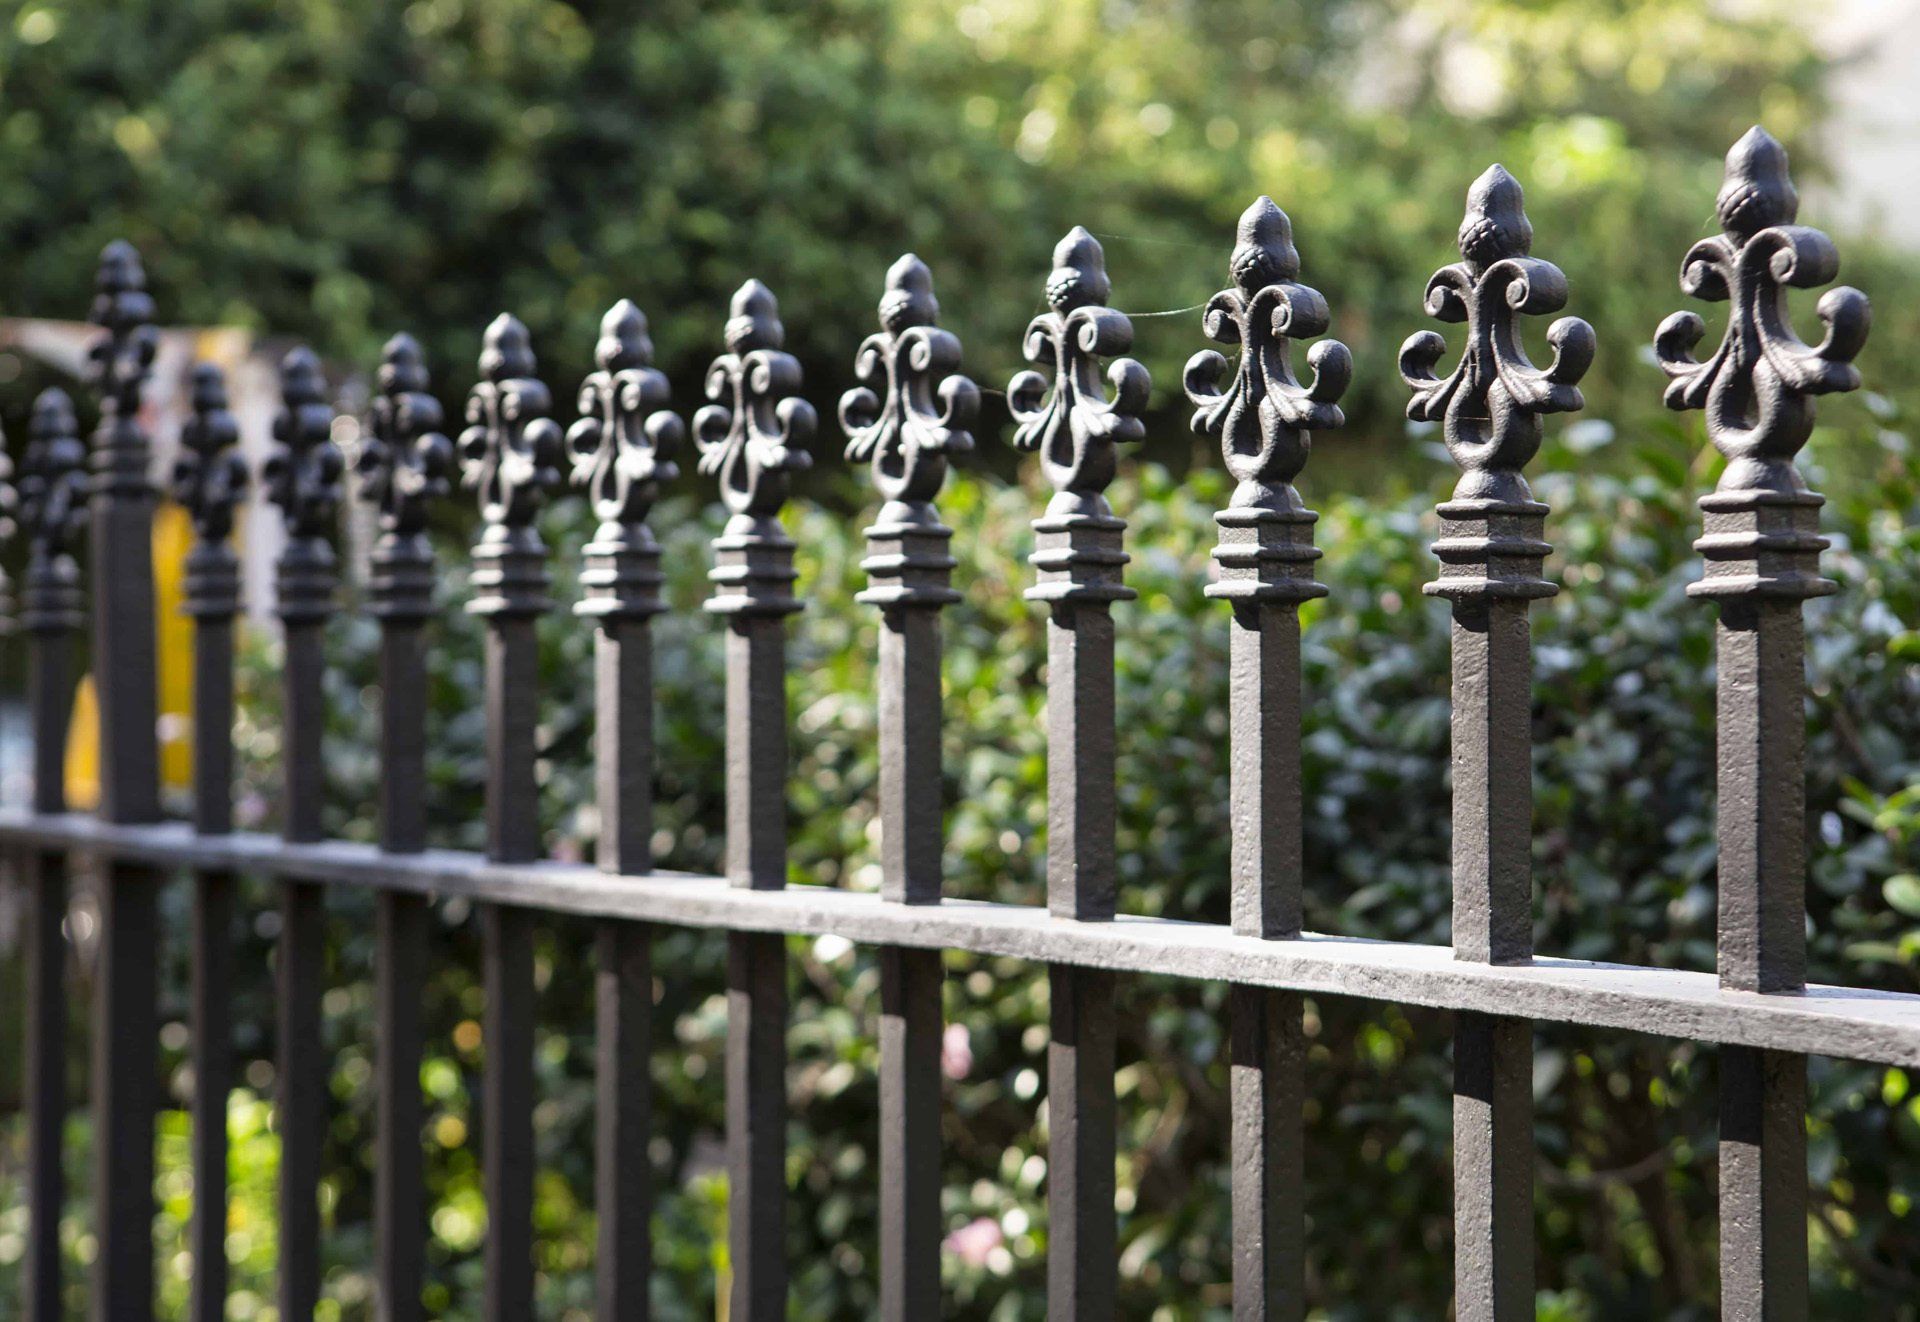 Wrought iron fencing is a low maintenance solution